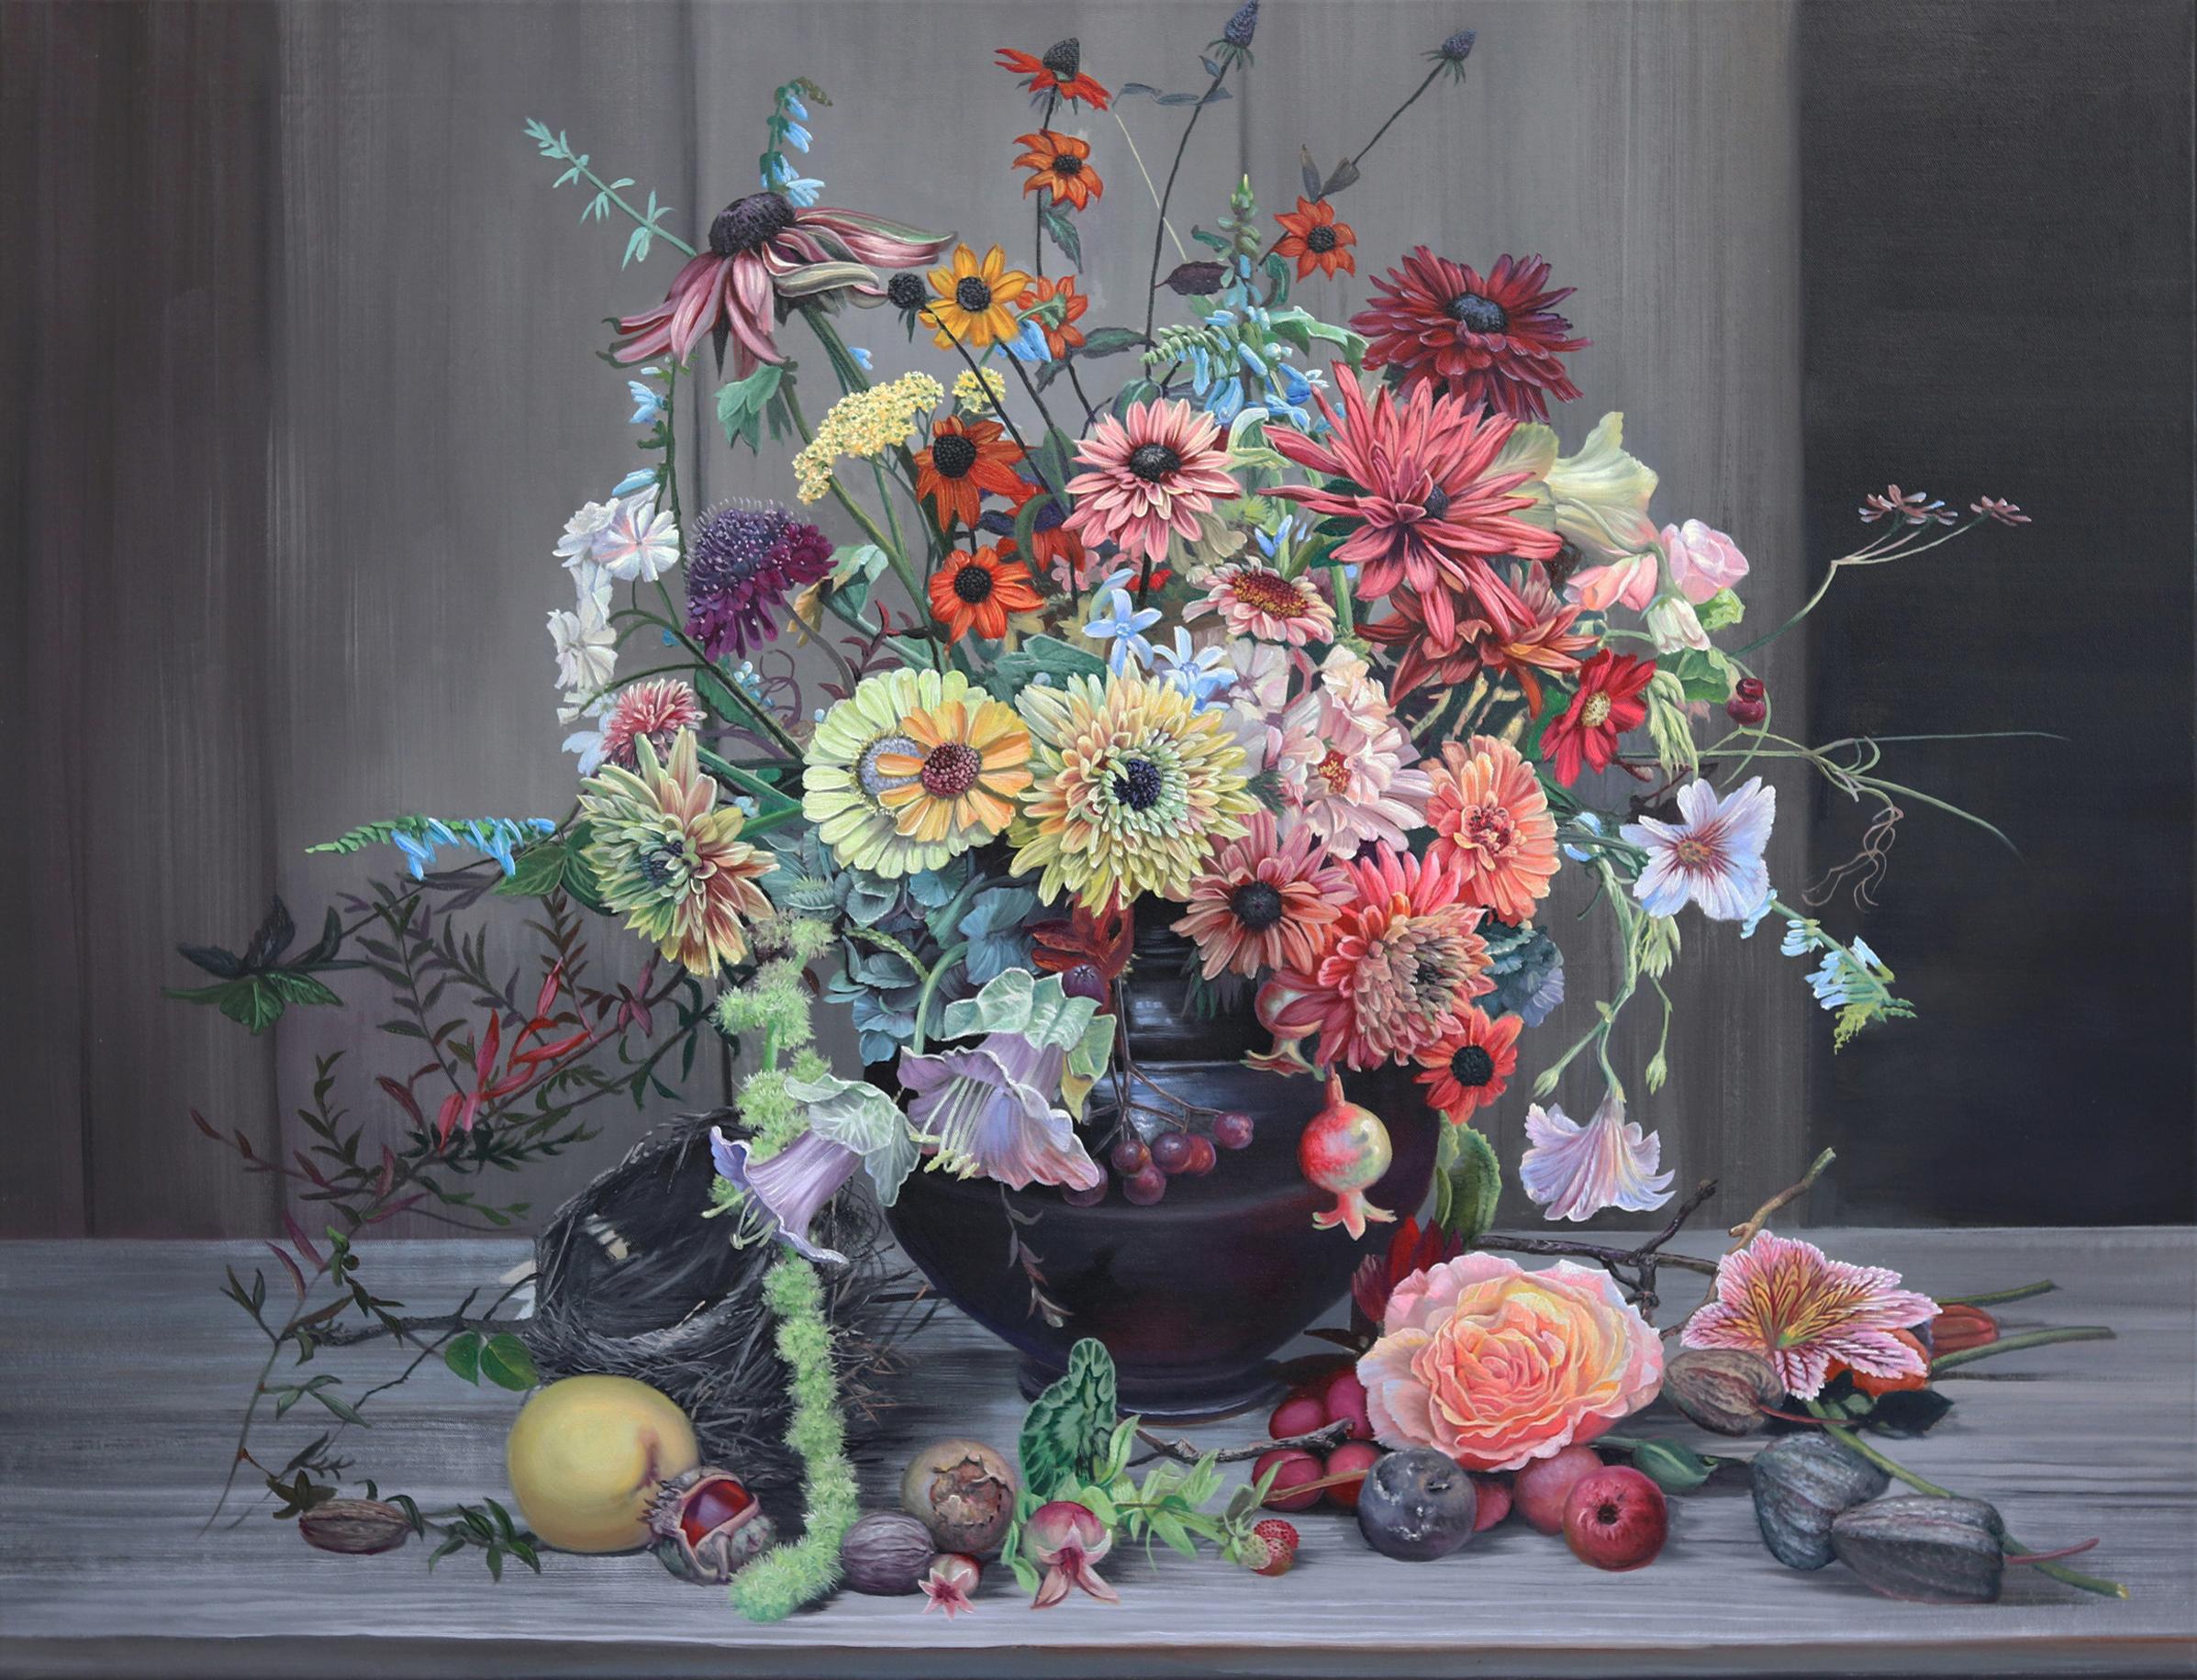 Time To Grow - Hyperrealist Botanical Flower Still Life Oil Painting